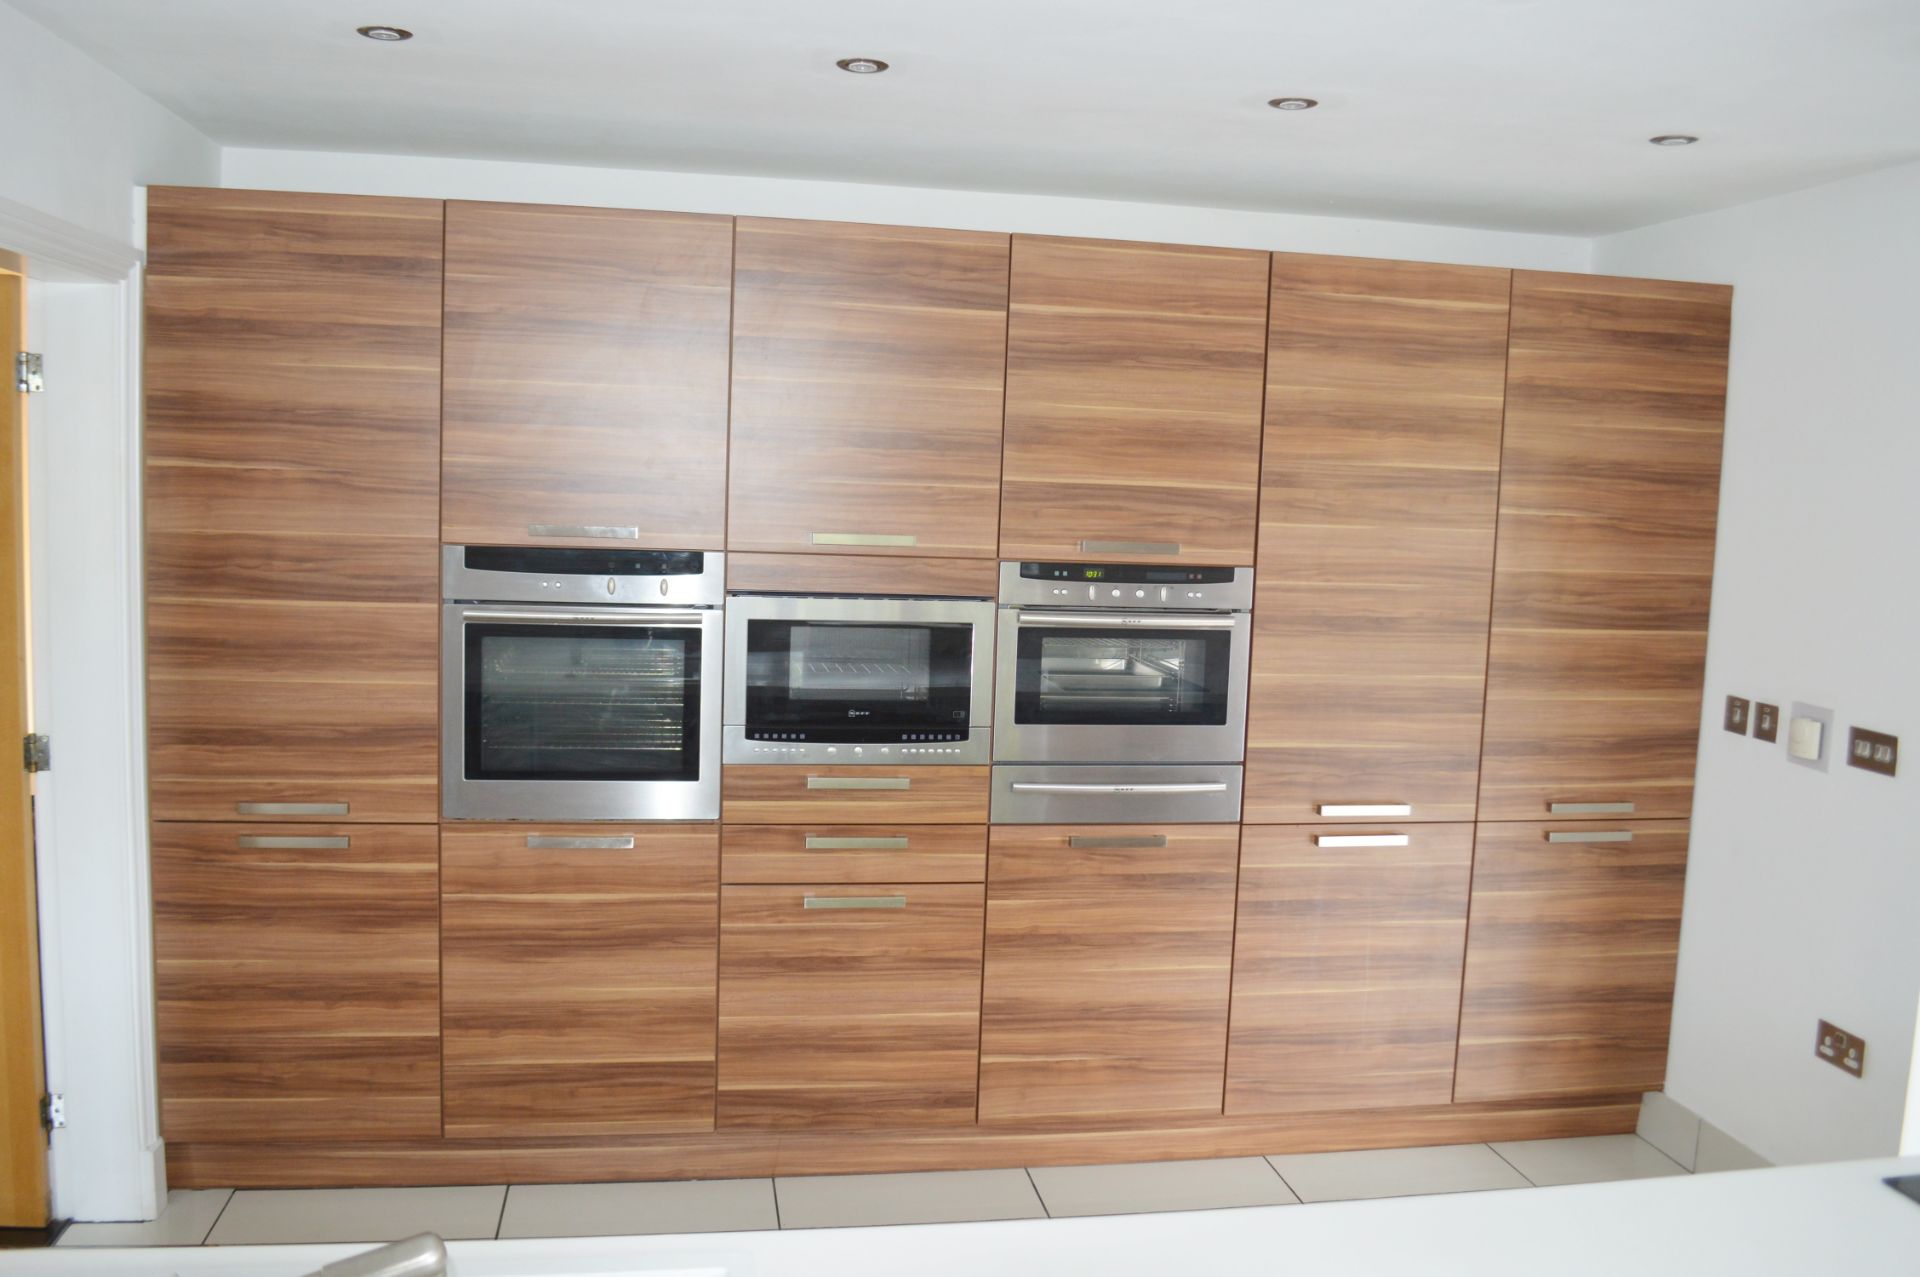 1 x Contemporary Bespoke Fitted Kitchen And Utilty Room  With Integrated Neff Branded Appliances, - Image 11 of 32